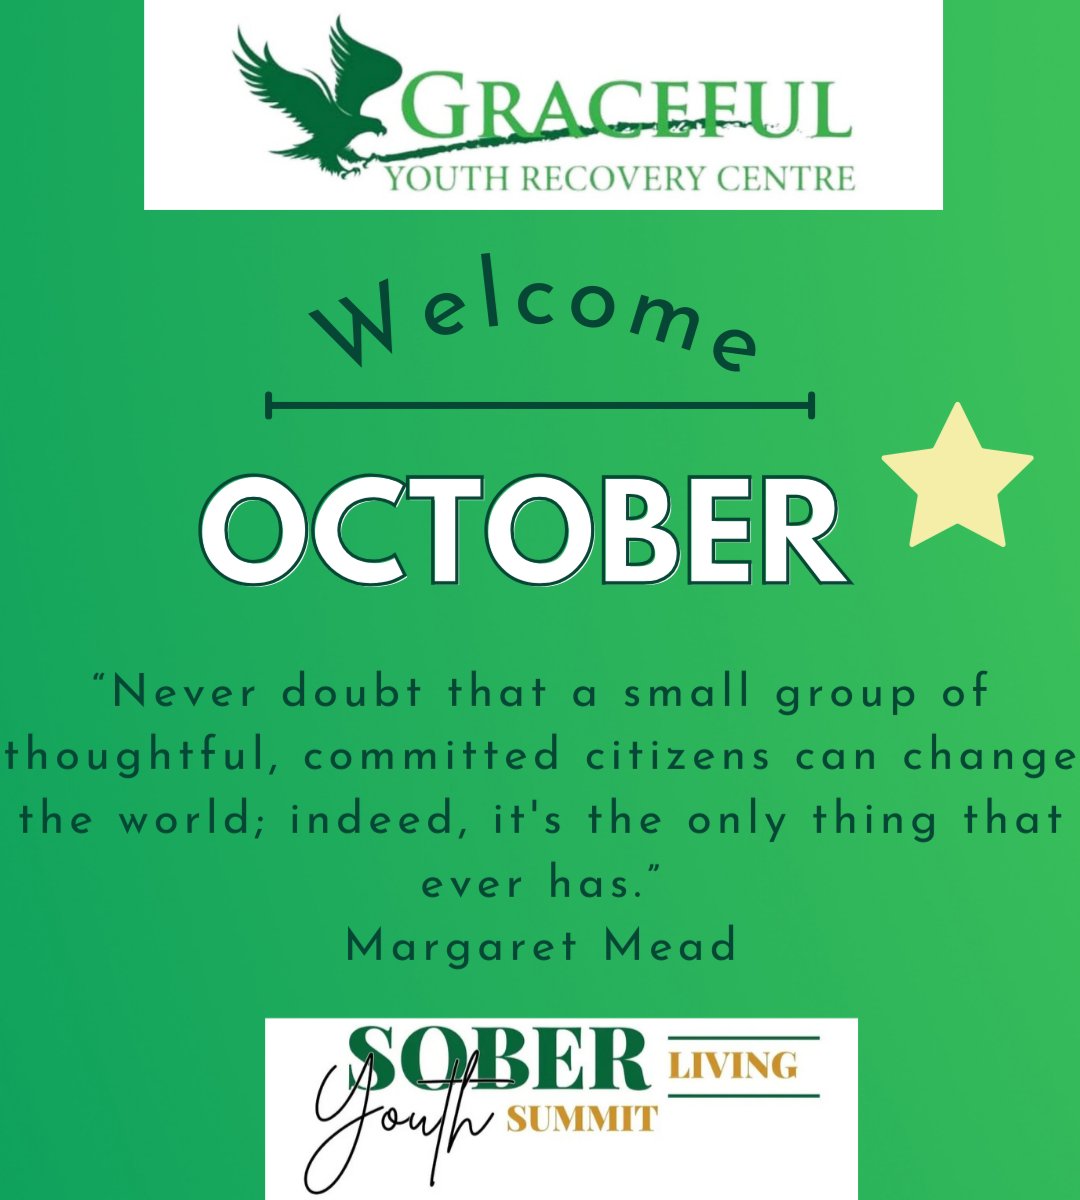 Welcome OCTOBER “Never doubt that a small group of thoughtful, committed citizens can change the world; indeed, it's the only thing that ever has.”~ Margaret Mead
#soberlivingyouthsummit #addressingyouthchallenges #alcoholprevention #addictionrecovery #wedorecover #alcoholpolicy